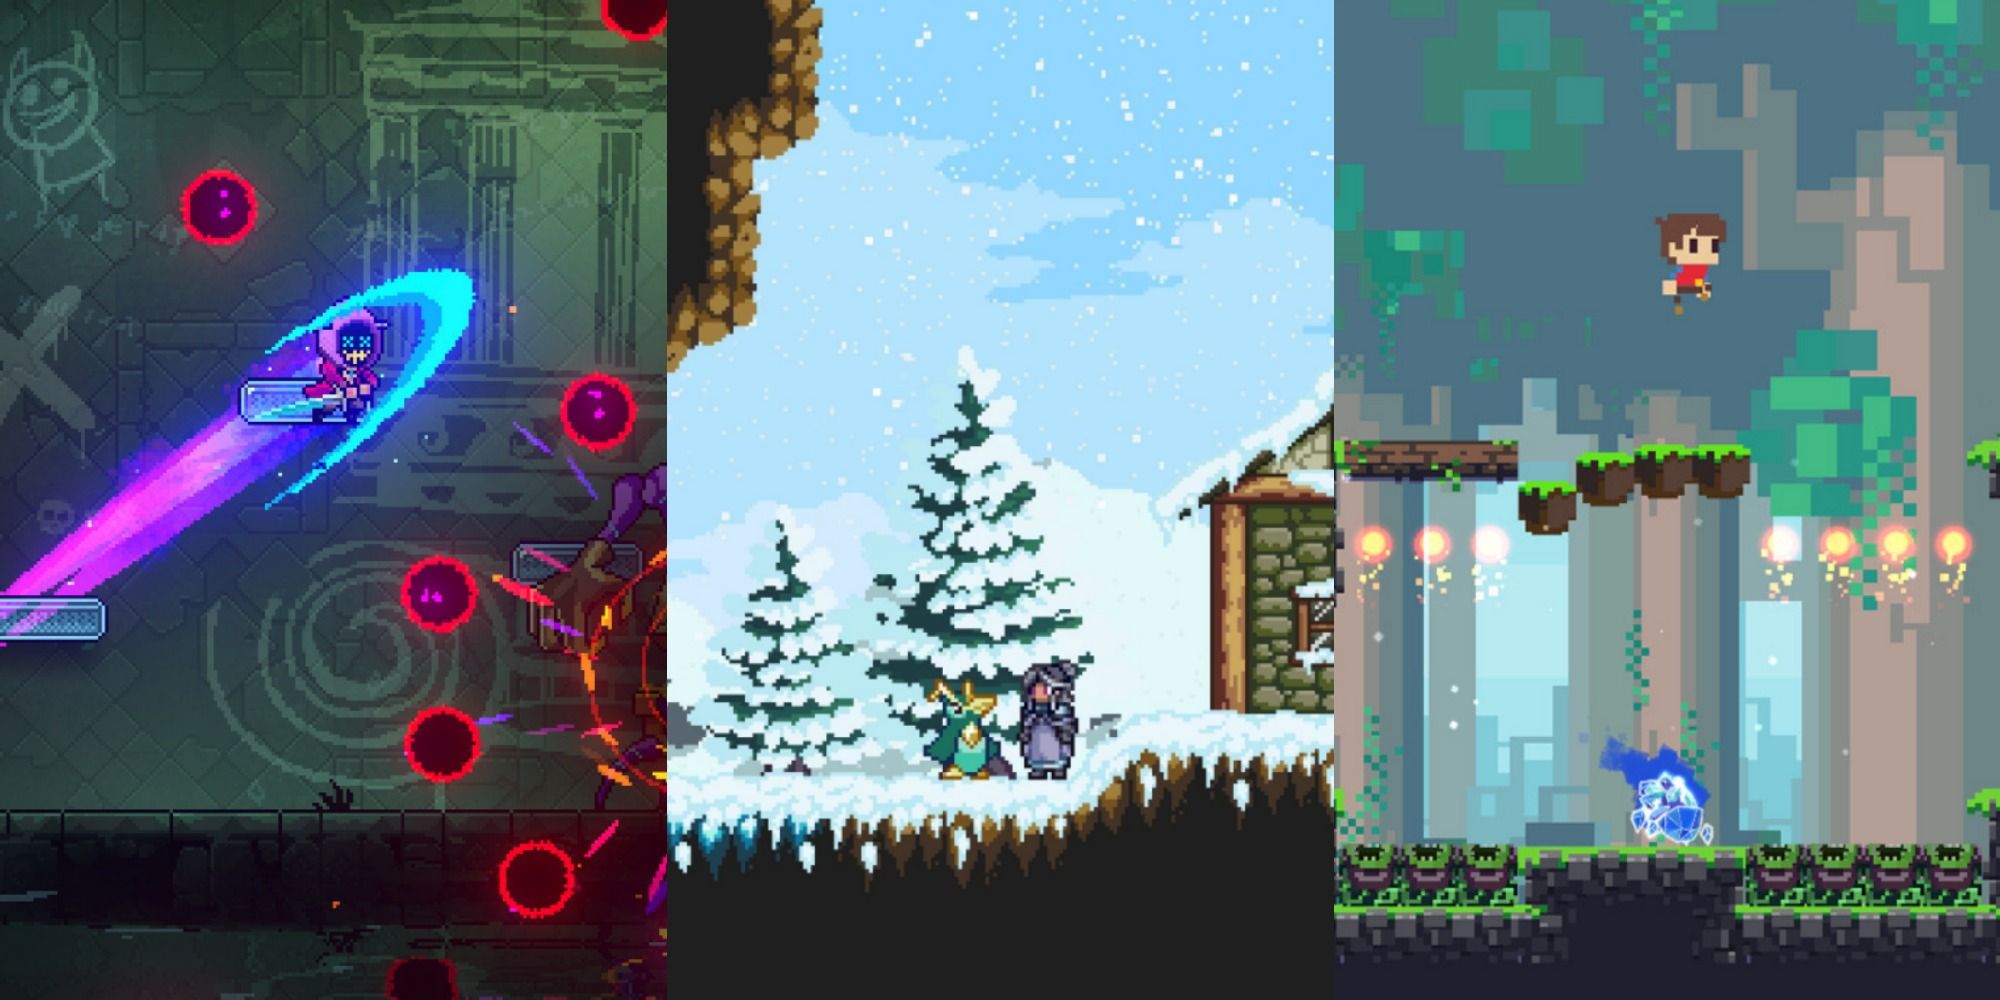 character fighting in neon abyss, two characters talking in snow world in monster sanctuary, pip jumping over baddie in adventures of pip featured